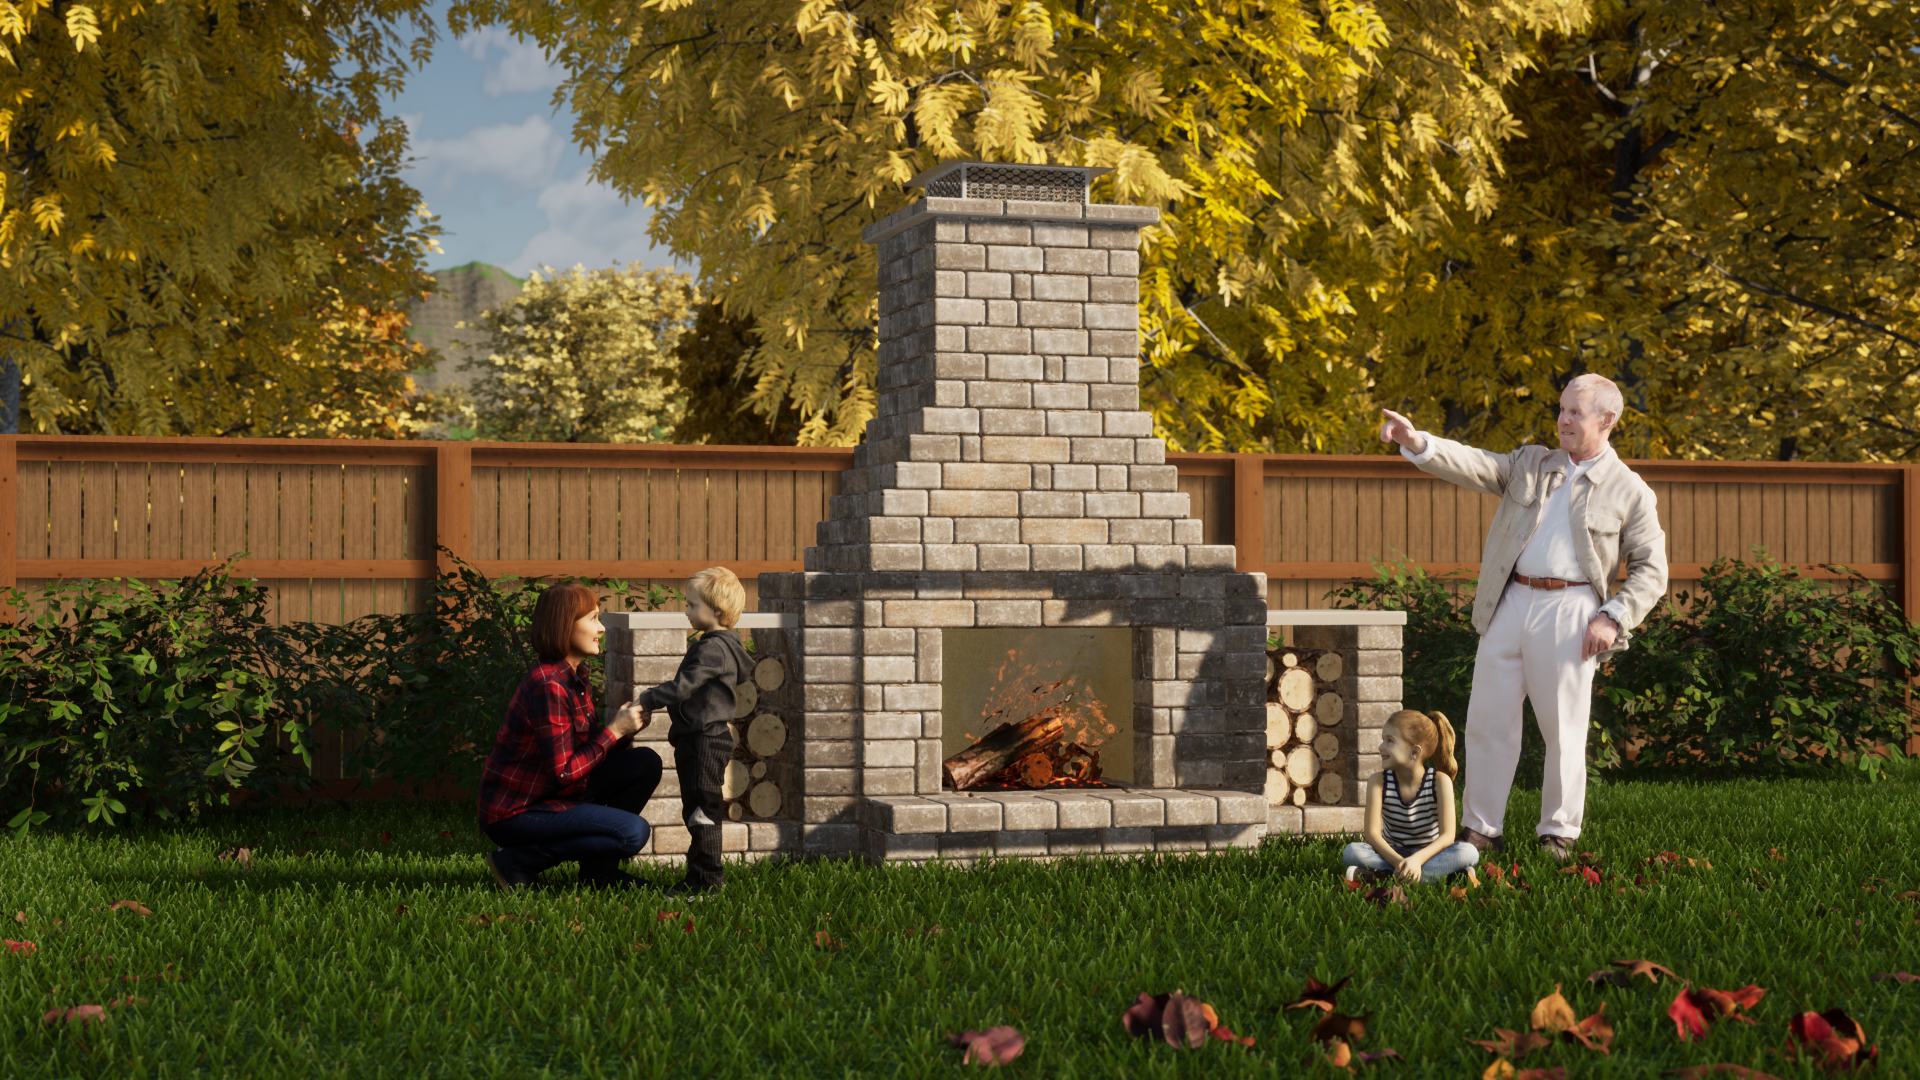 You have tons of choices when choosing am outdoor fireplace.